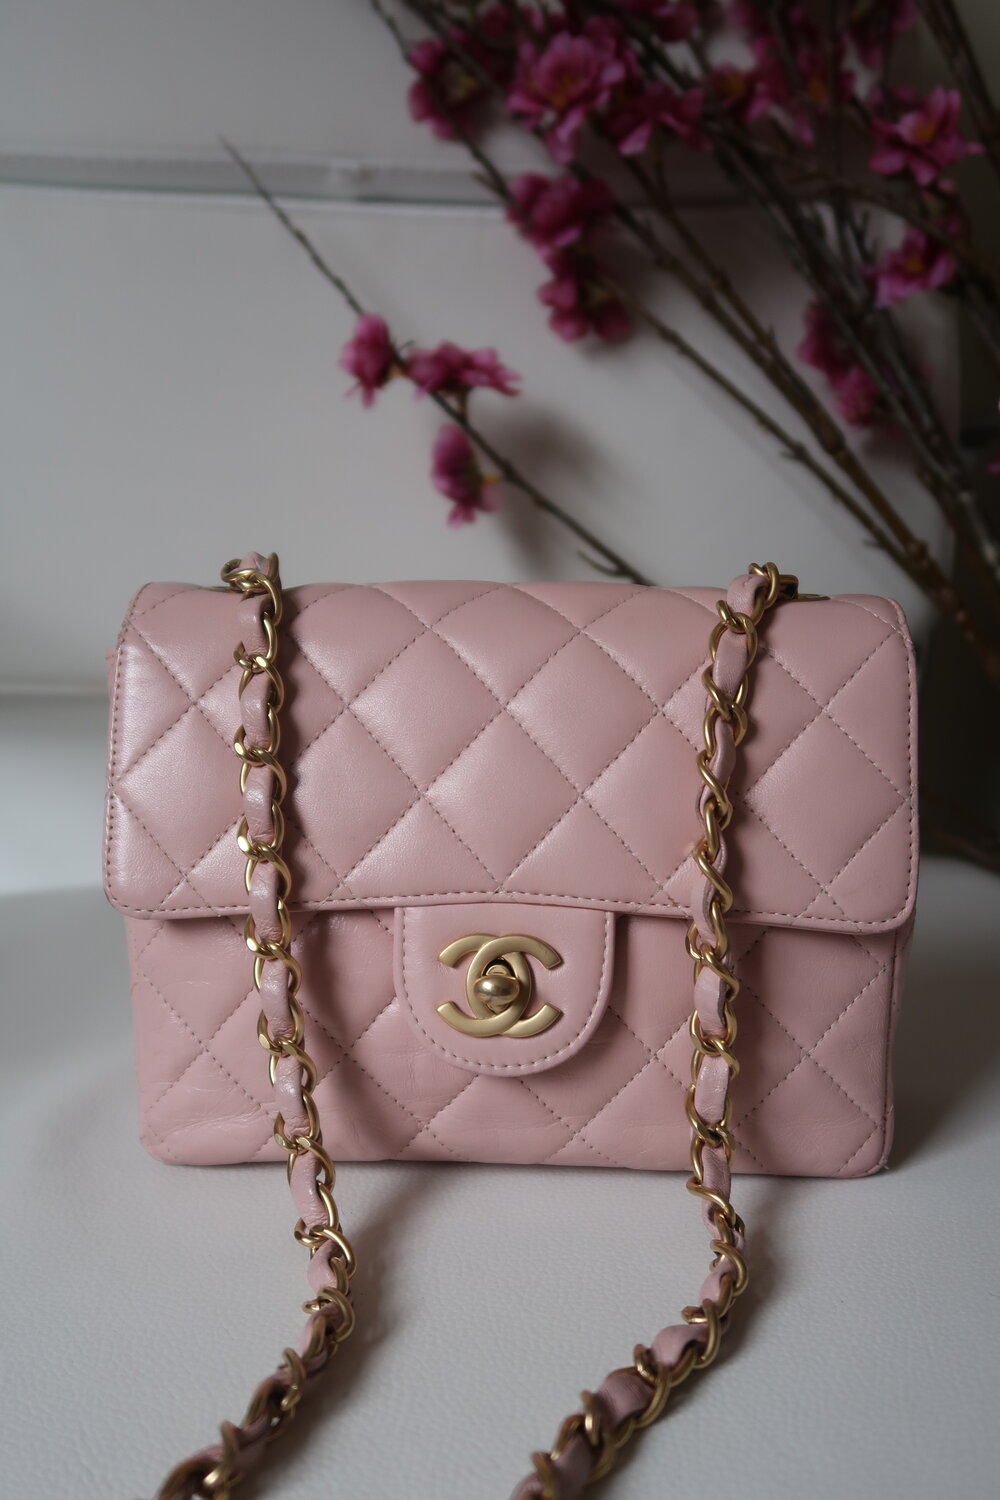 Chanel Vintage Pink Lambskin Small Flap Bag Chanel